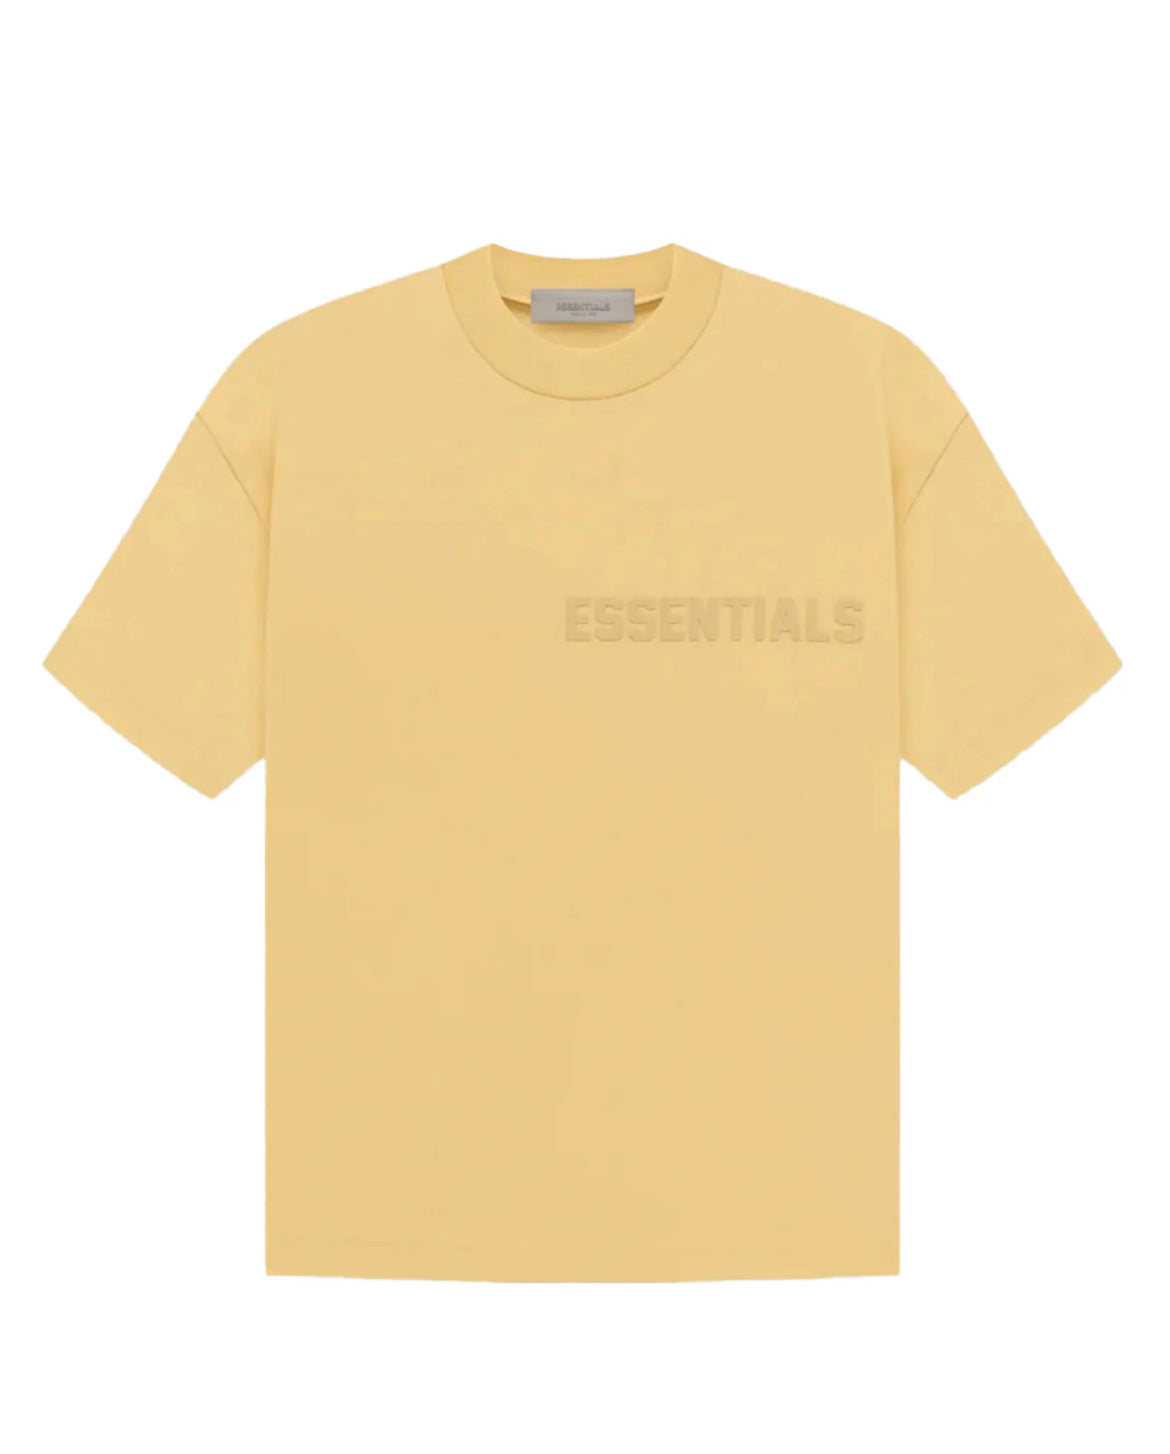 Essentials Fear of God S/S Tee